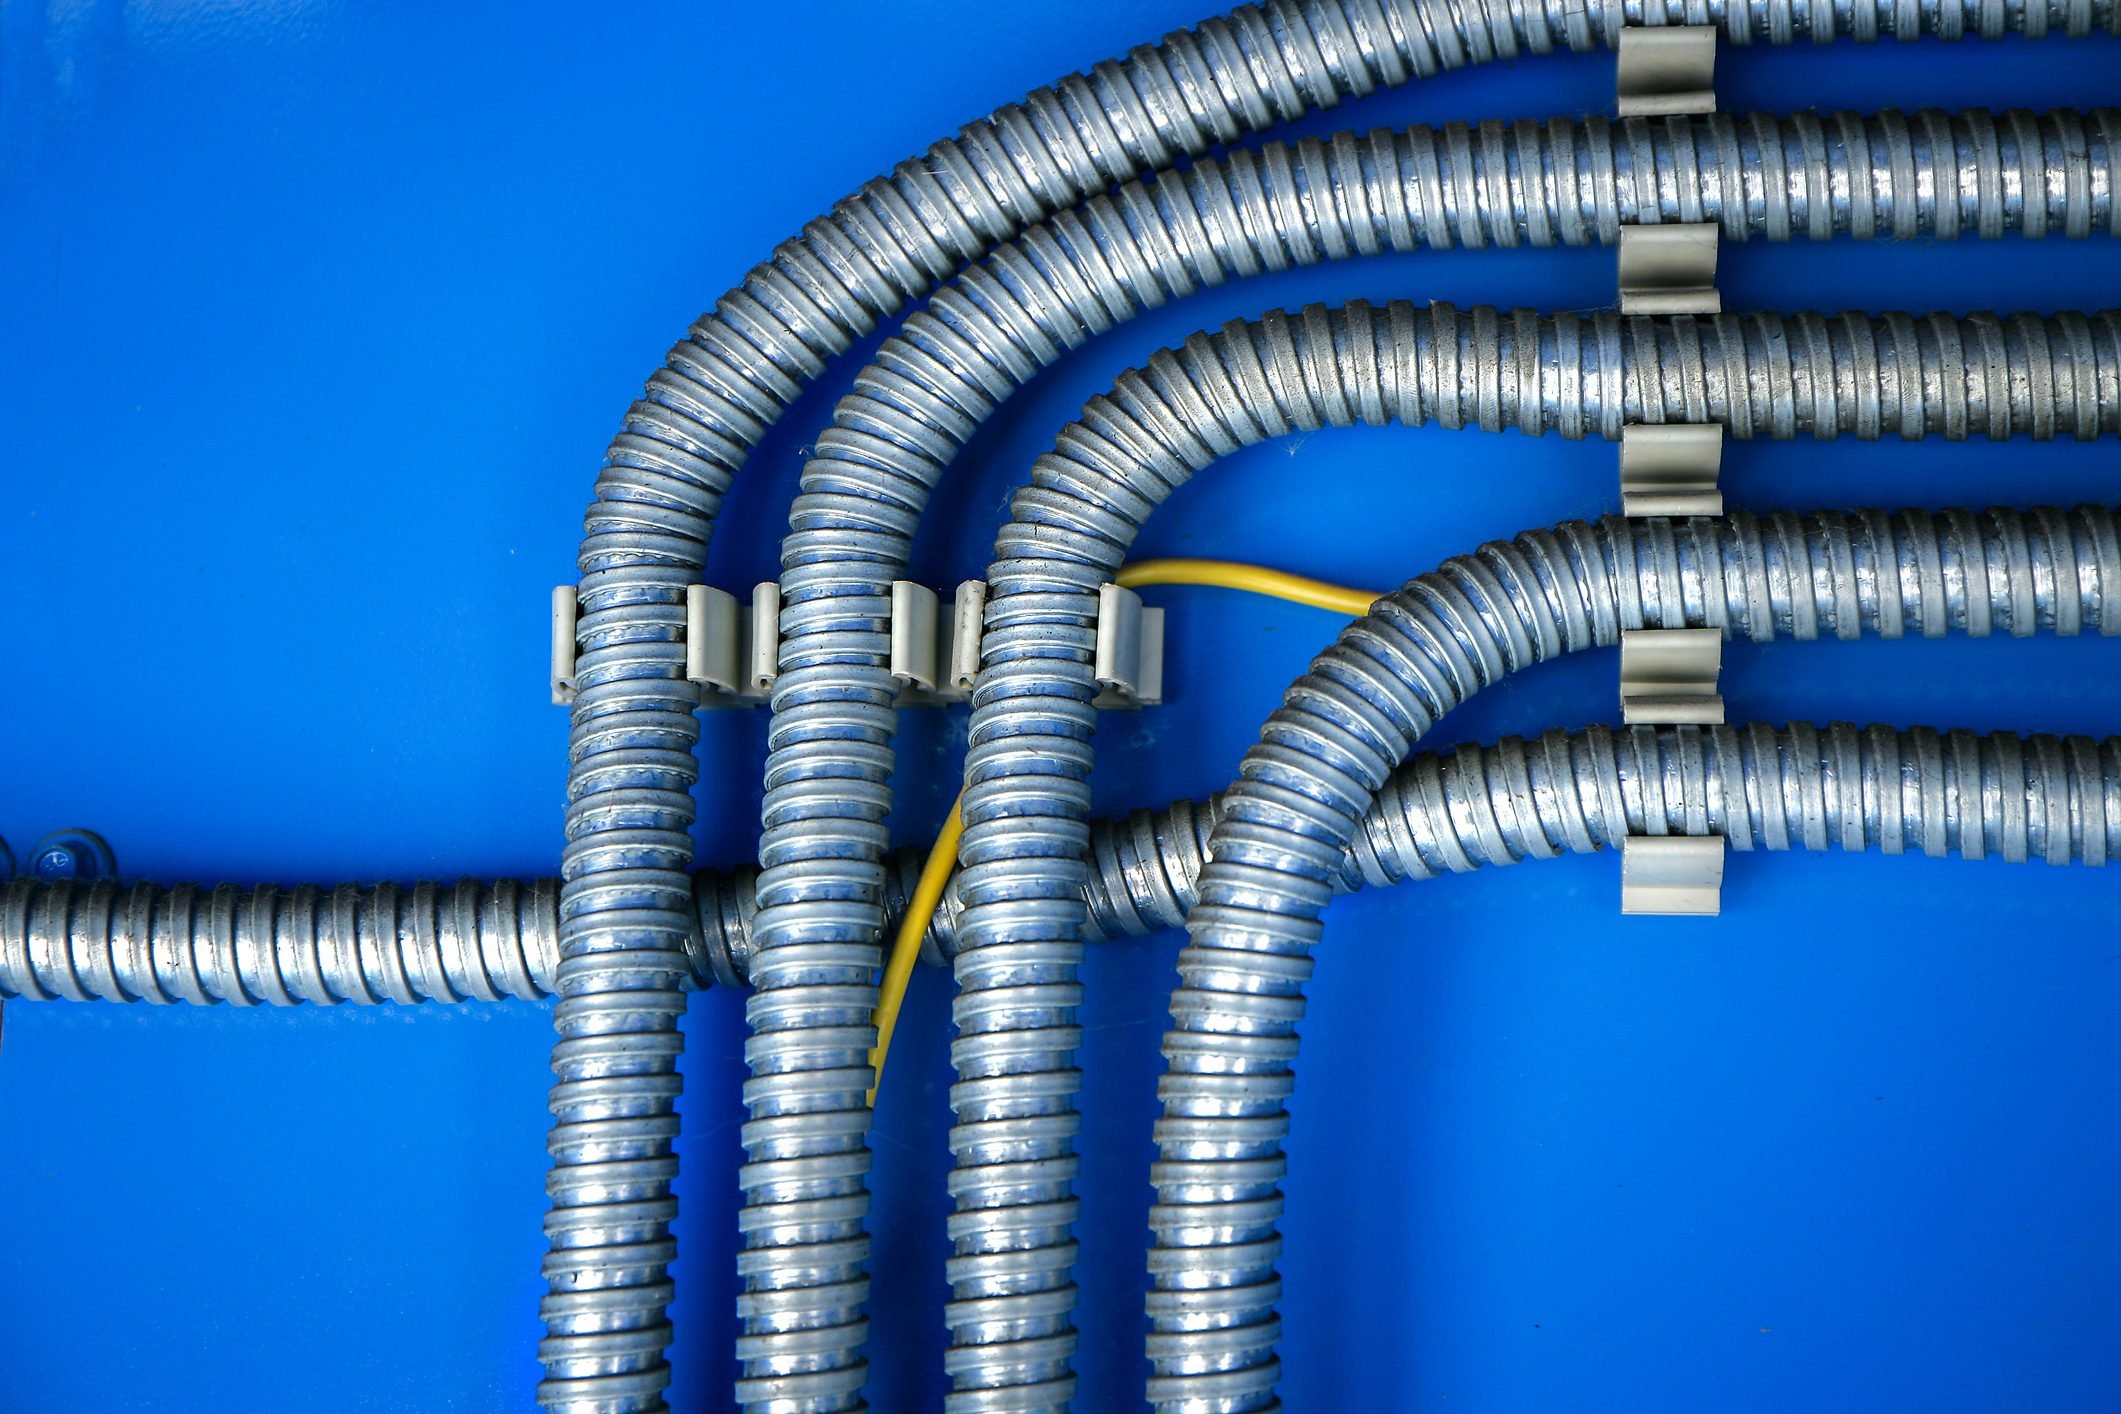 Why Should You Use Conduit for Electrical Wiring?